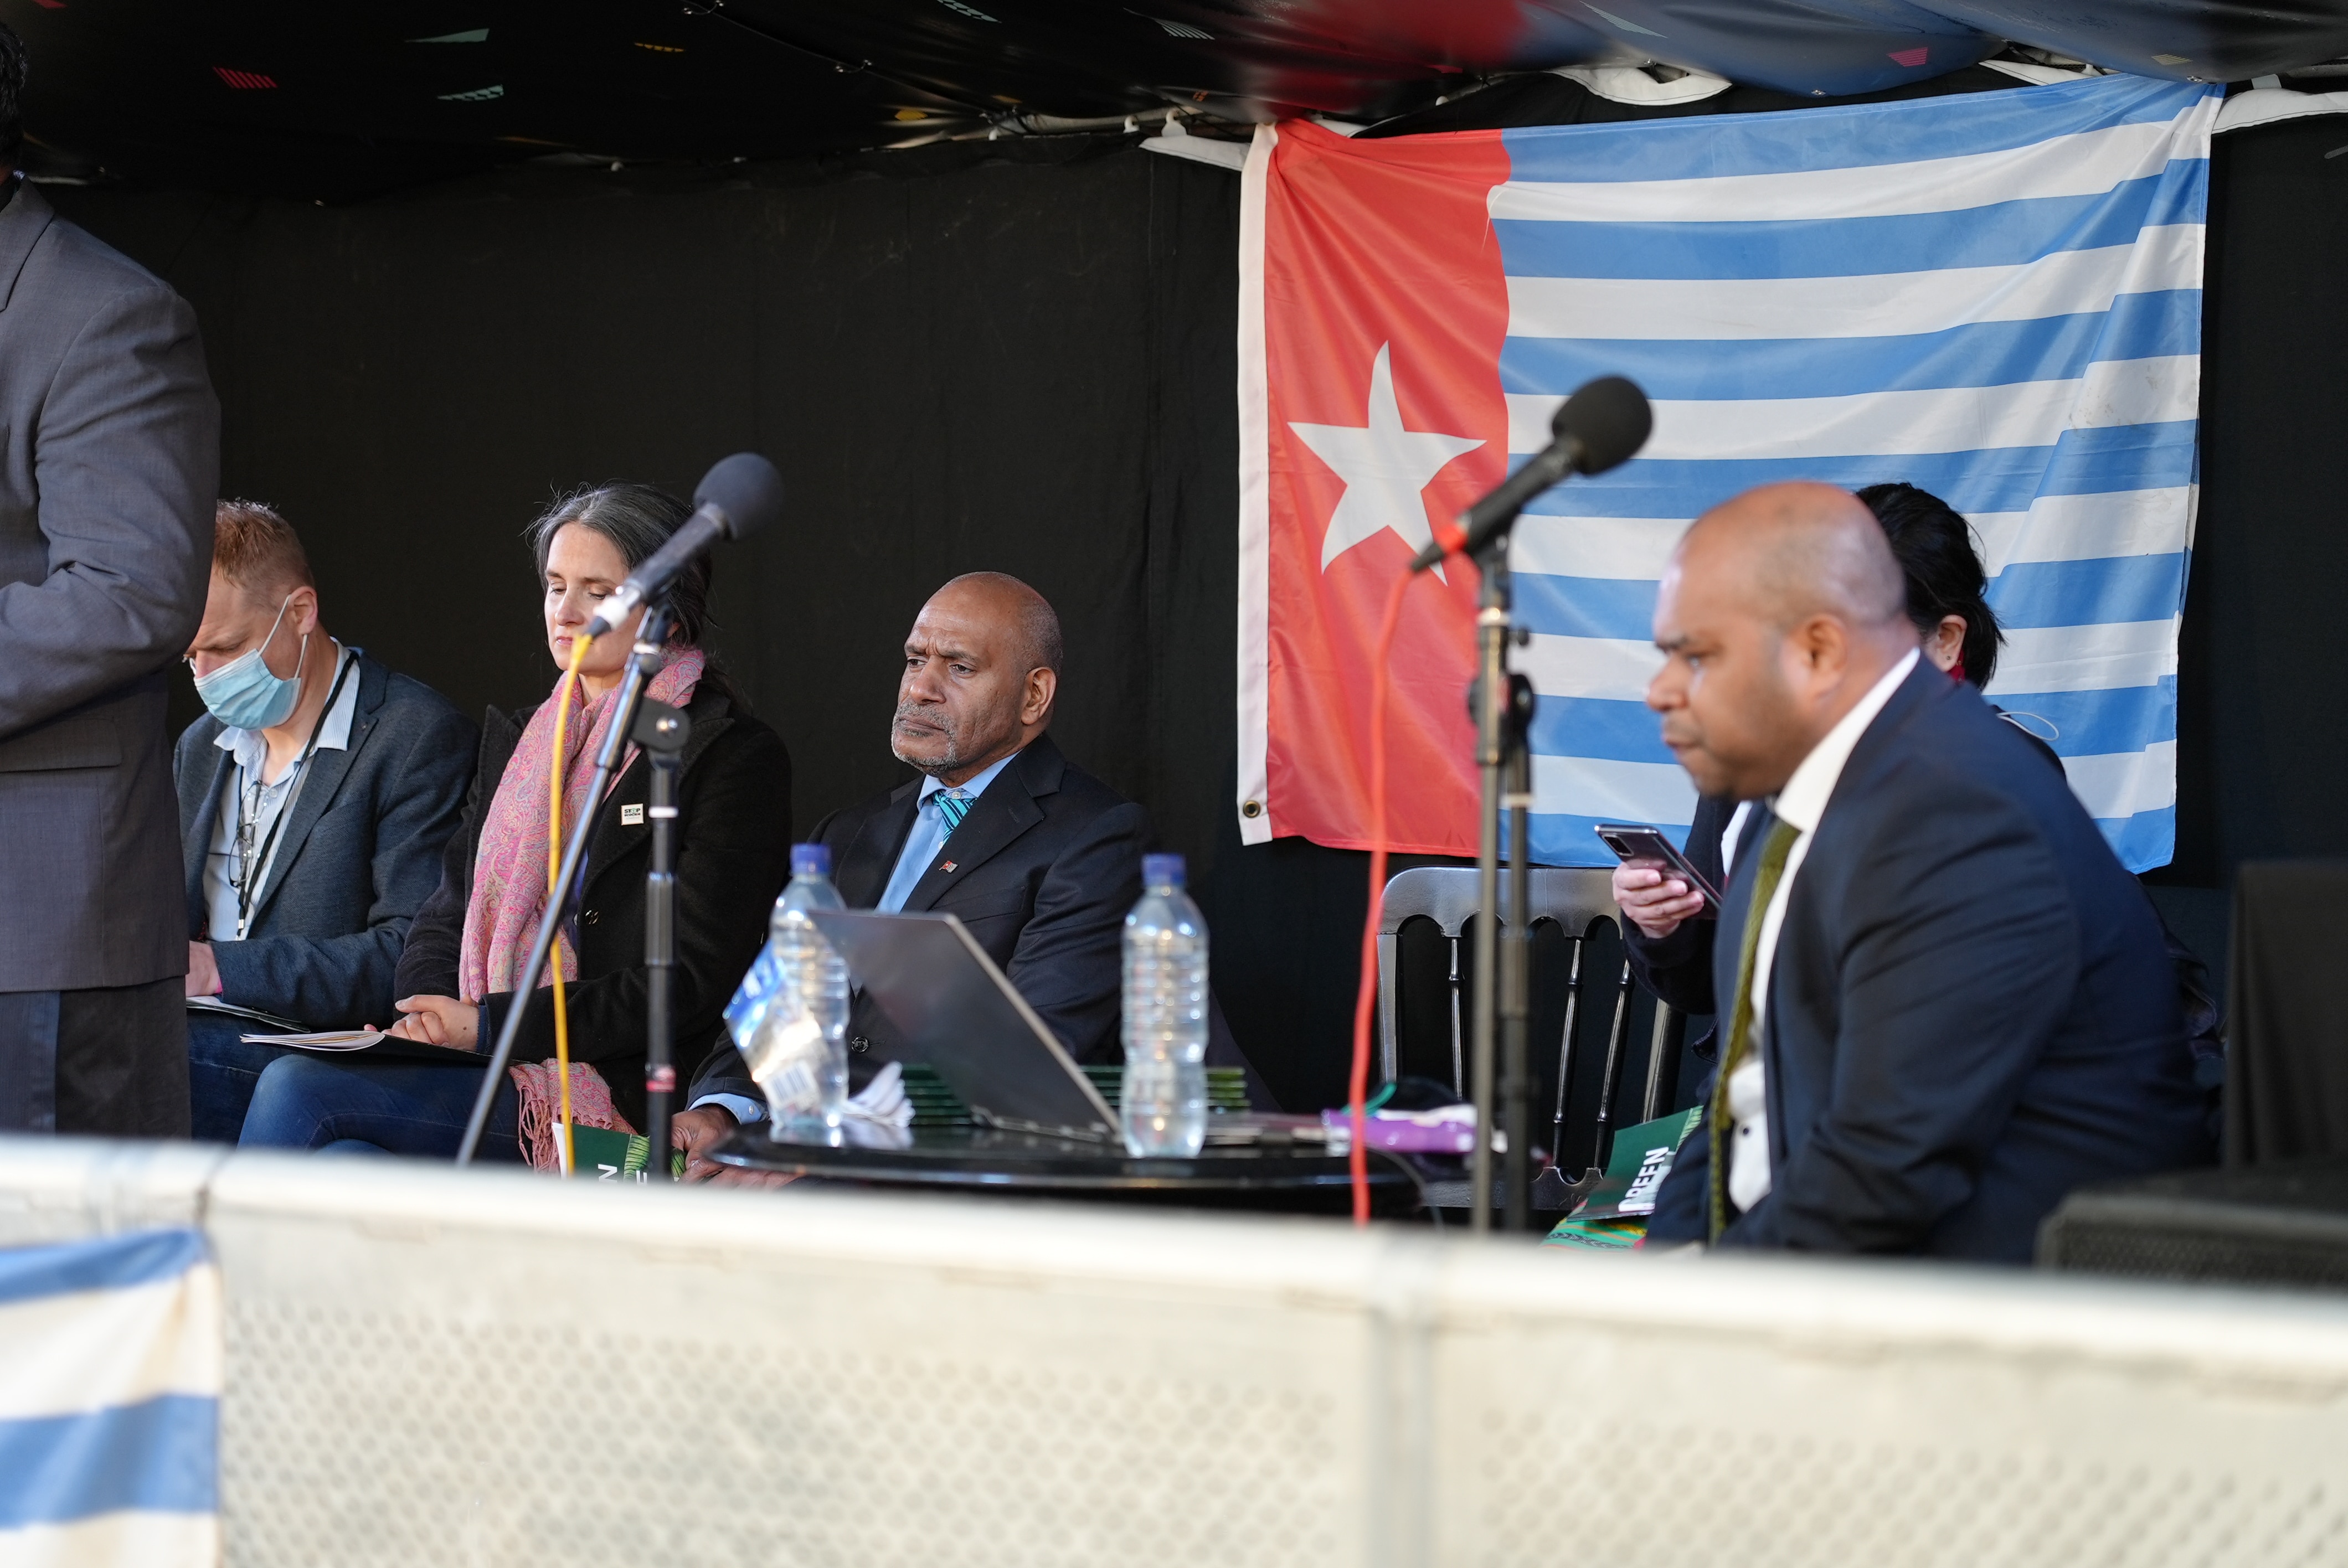 West Papuan independence leaders launch their Green State Vision in Glasgow, Scotland.